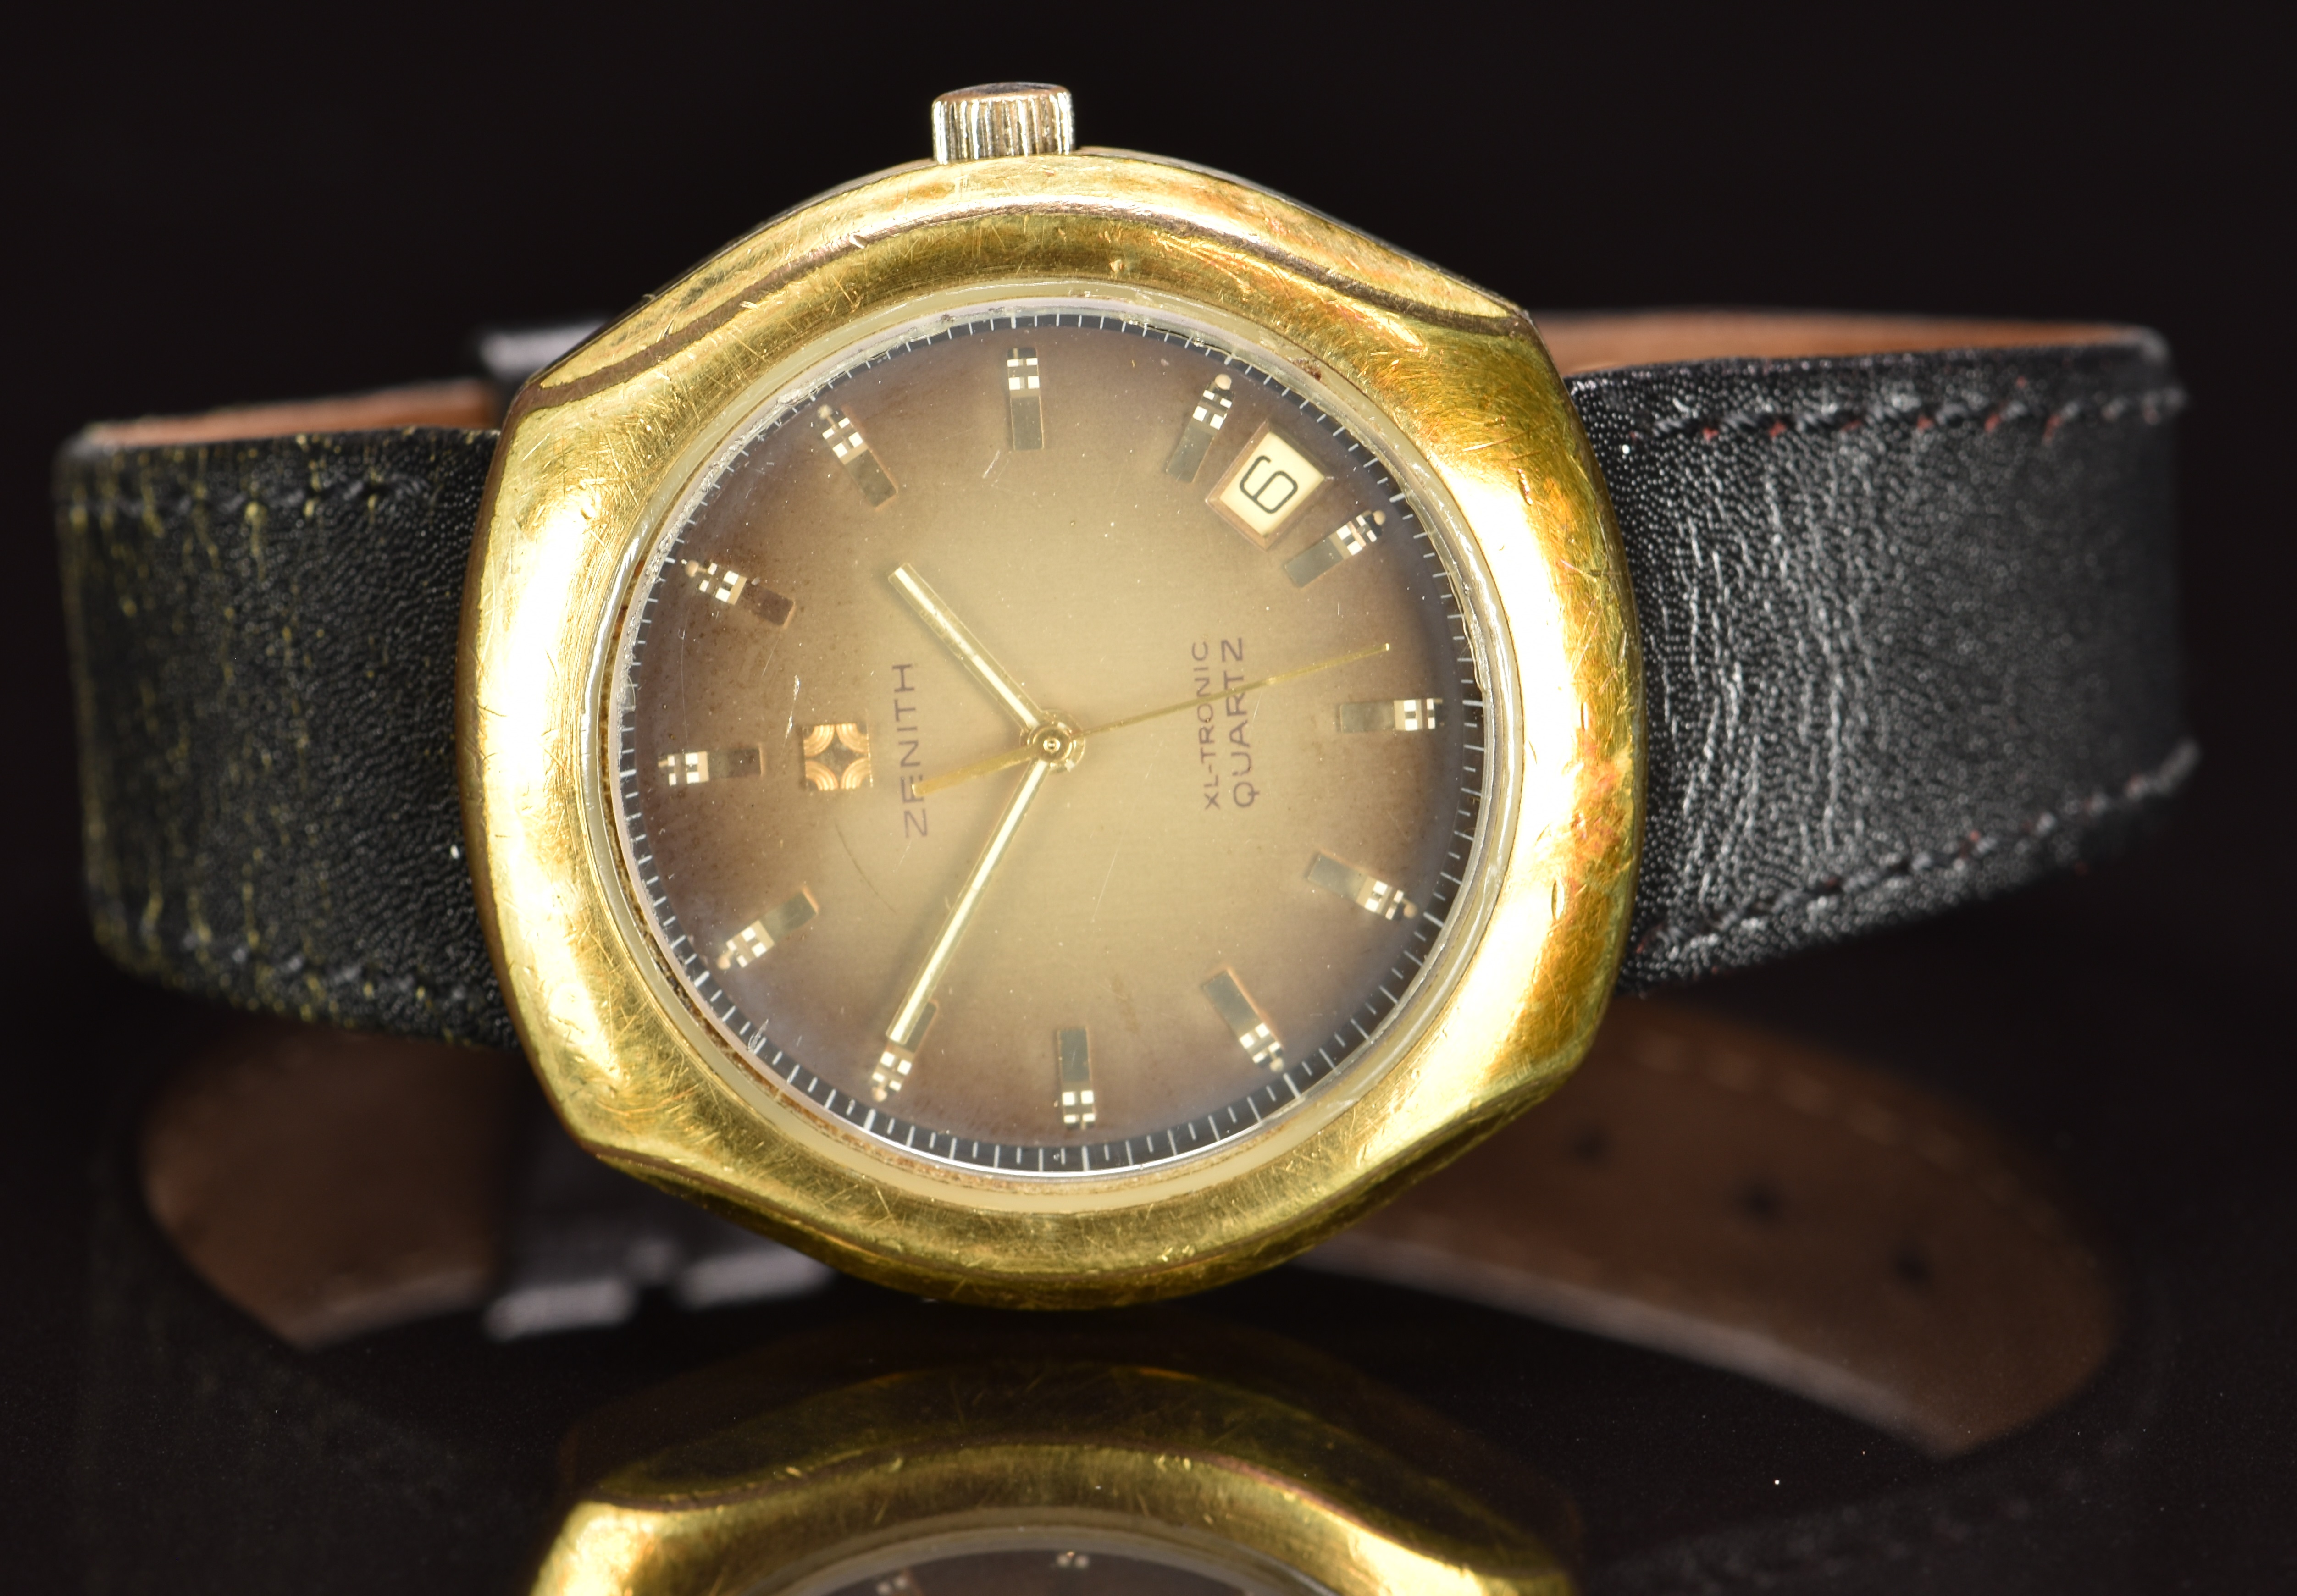 Zenith XL-Tronic gentleman's wristwatch ref. 20-0040-510 with date aperture, gold hands and hour - Image 4 of 5